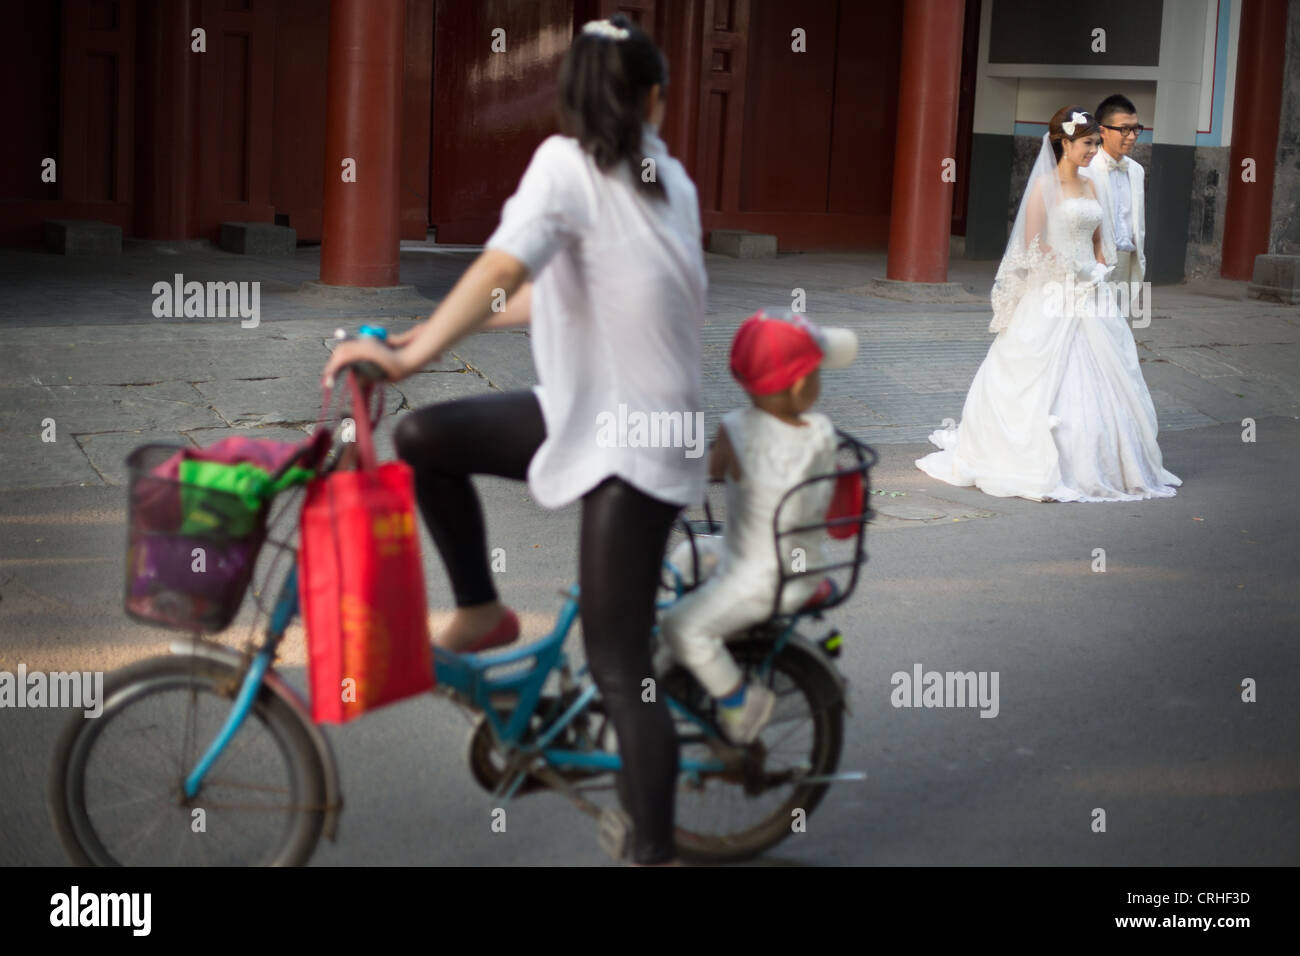 A couple pose for wedding photos in Guozijian Jie, near the Confucius Temple, in Beijing, China. Stock Photo